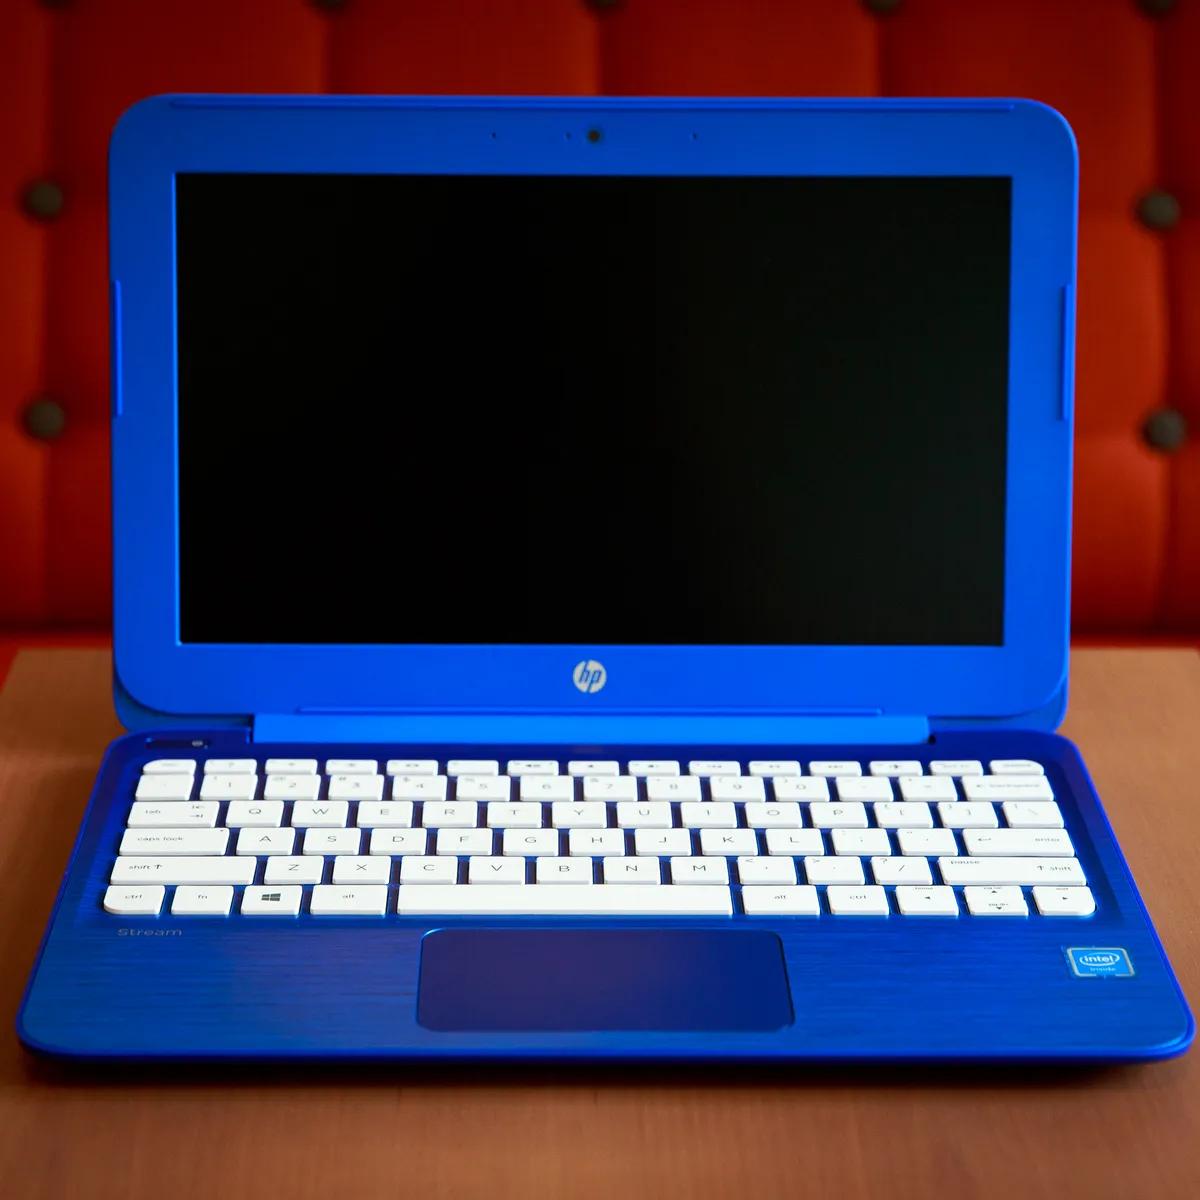 hp hewlett packard blue - How do I reset my HP stream laptop without the password